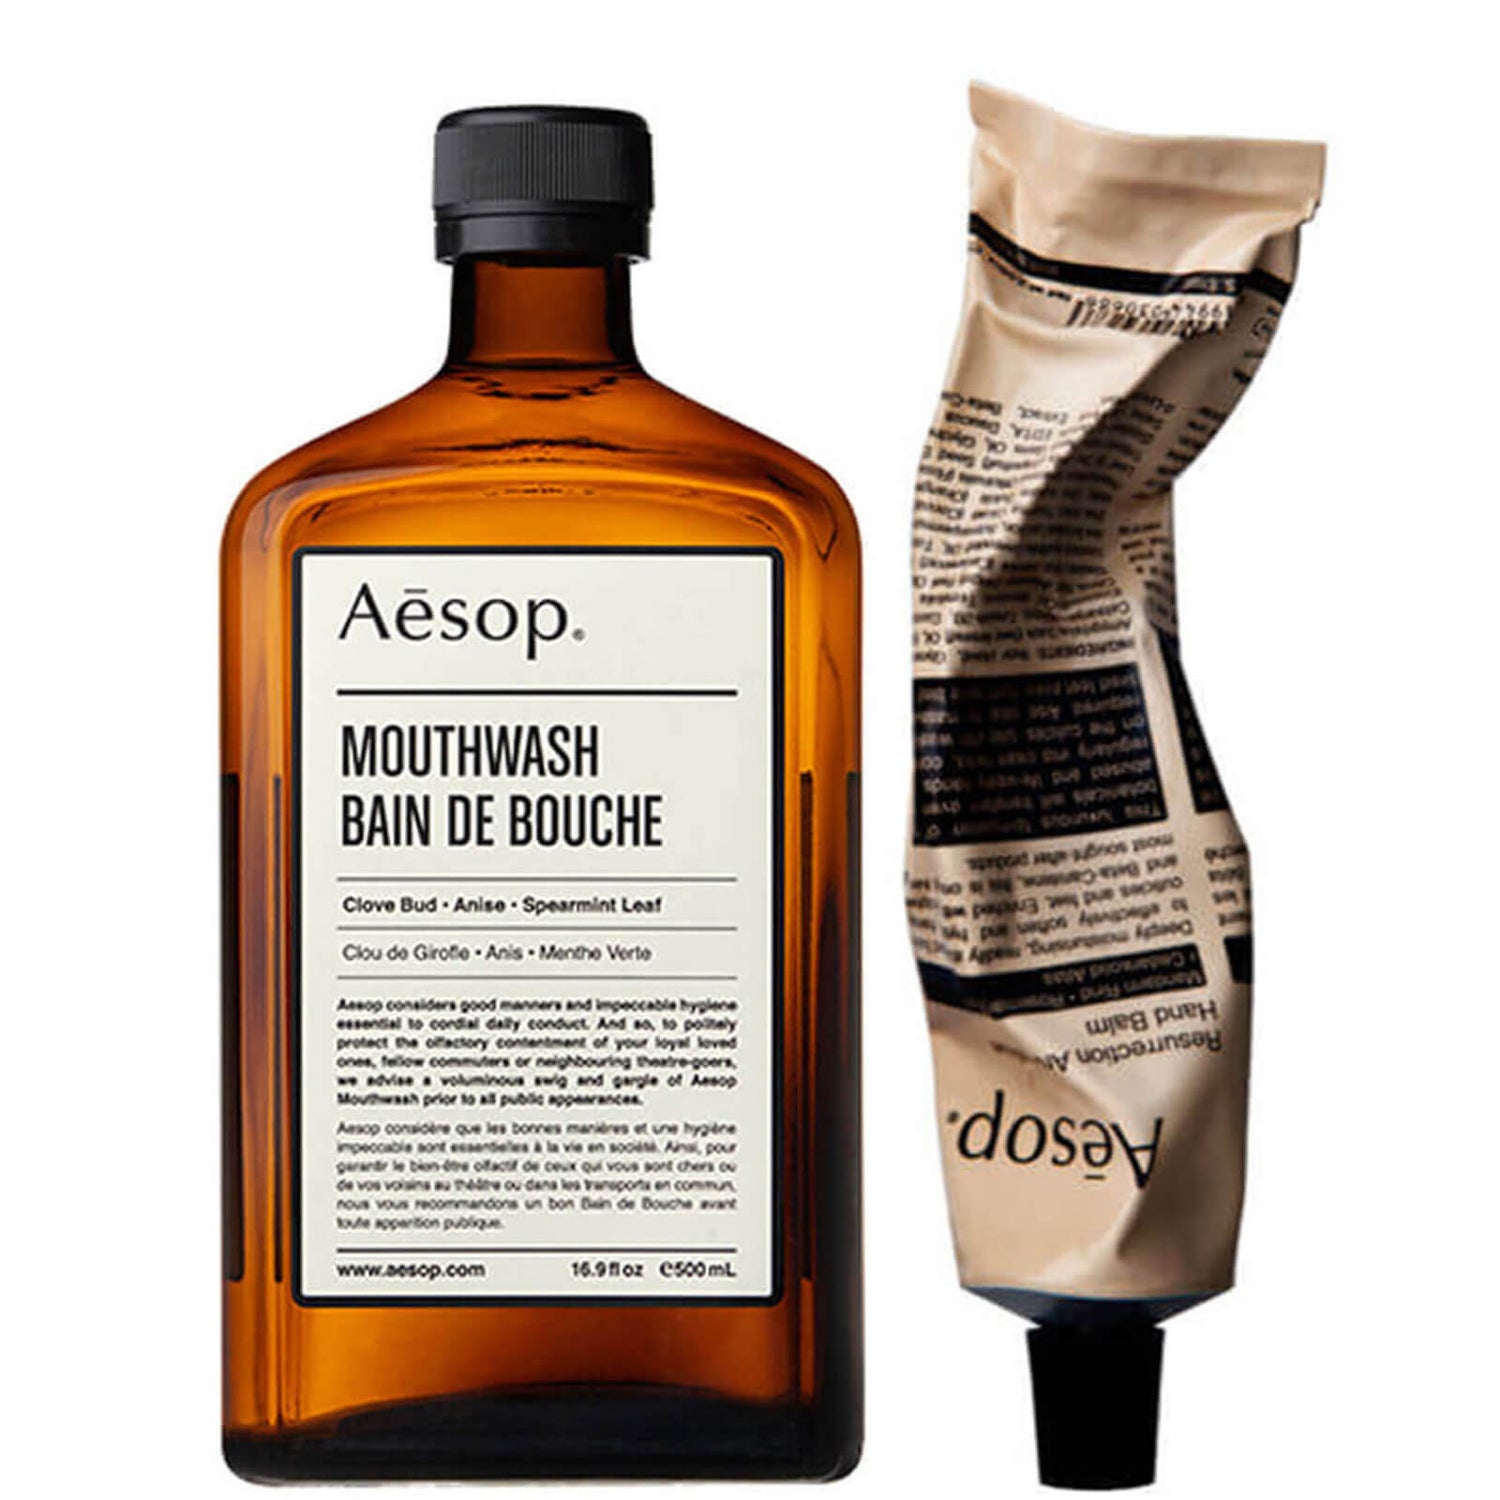 Aesop Hand Balm and Mouthwash Duo (Worth £38.00)